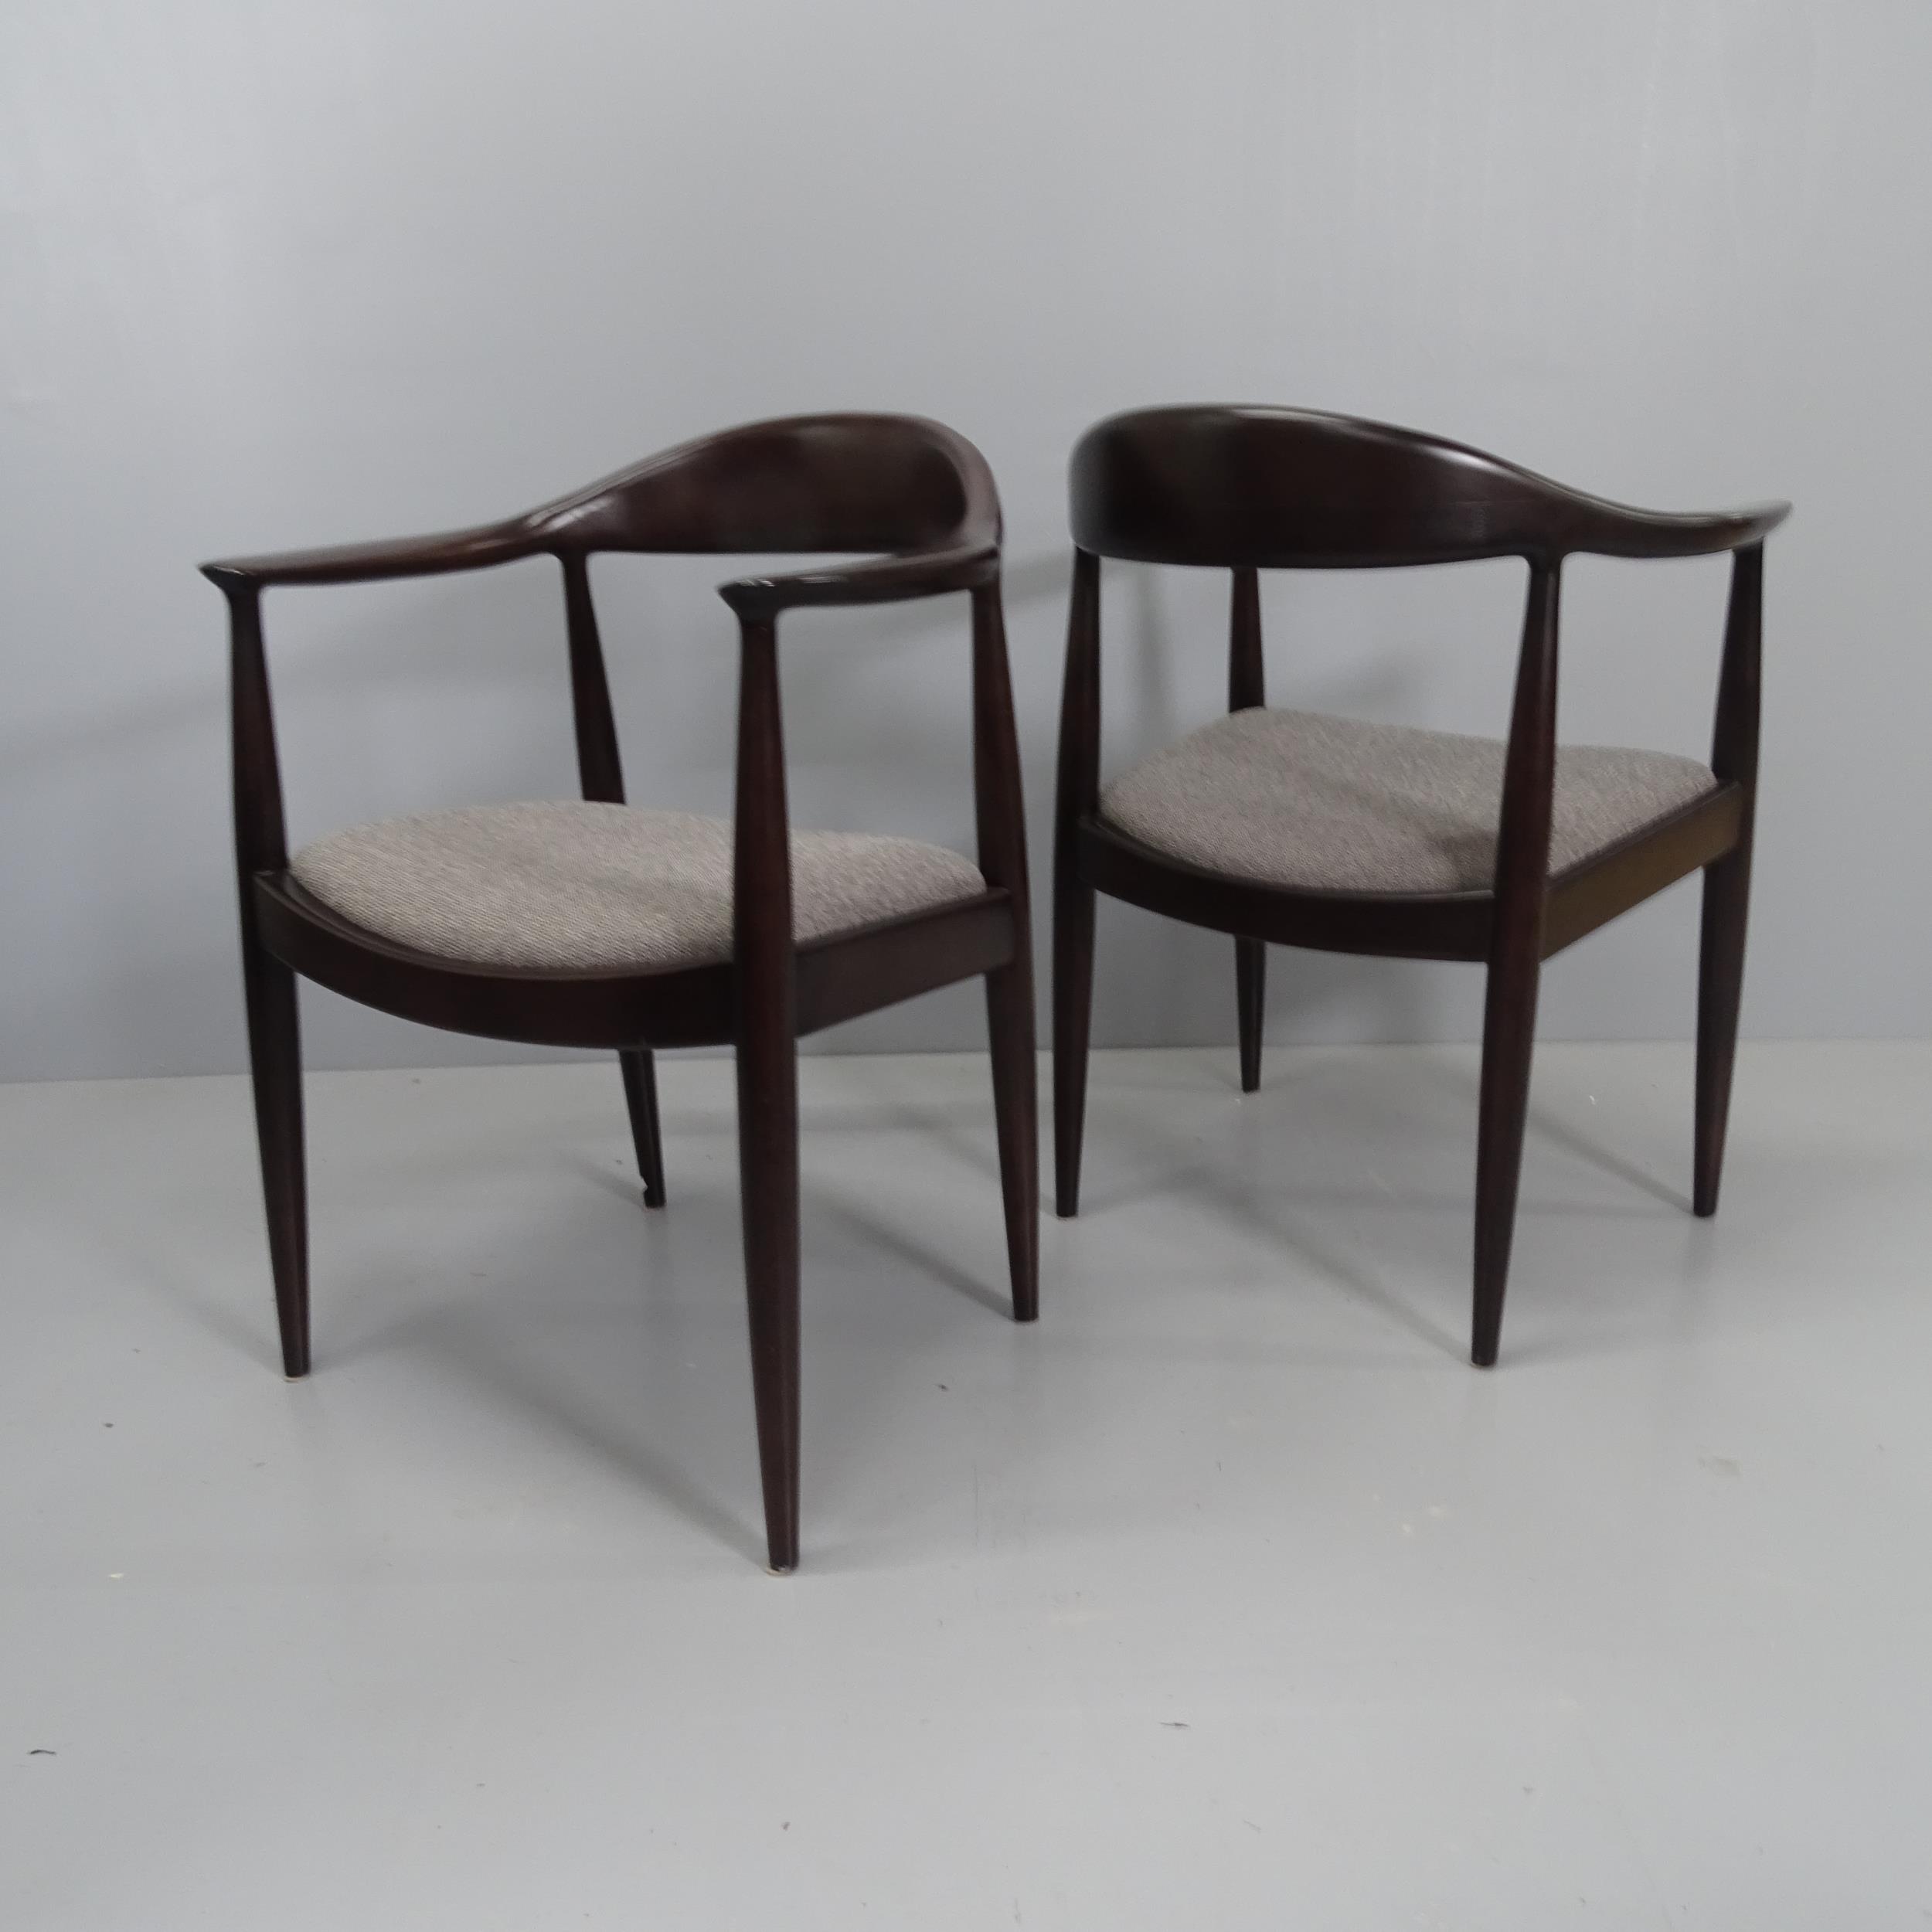 A pair of Hans Wegner Kennedy style armchairs in the mid-century Danish manner. - Image 2 of 2